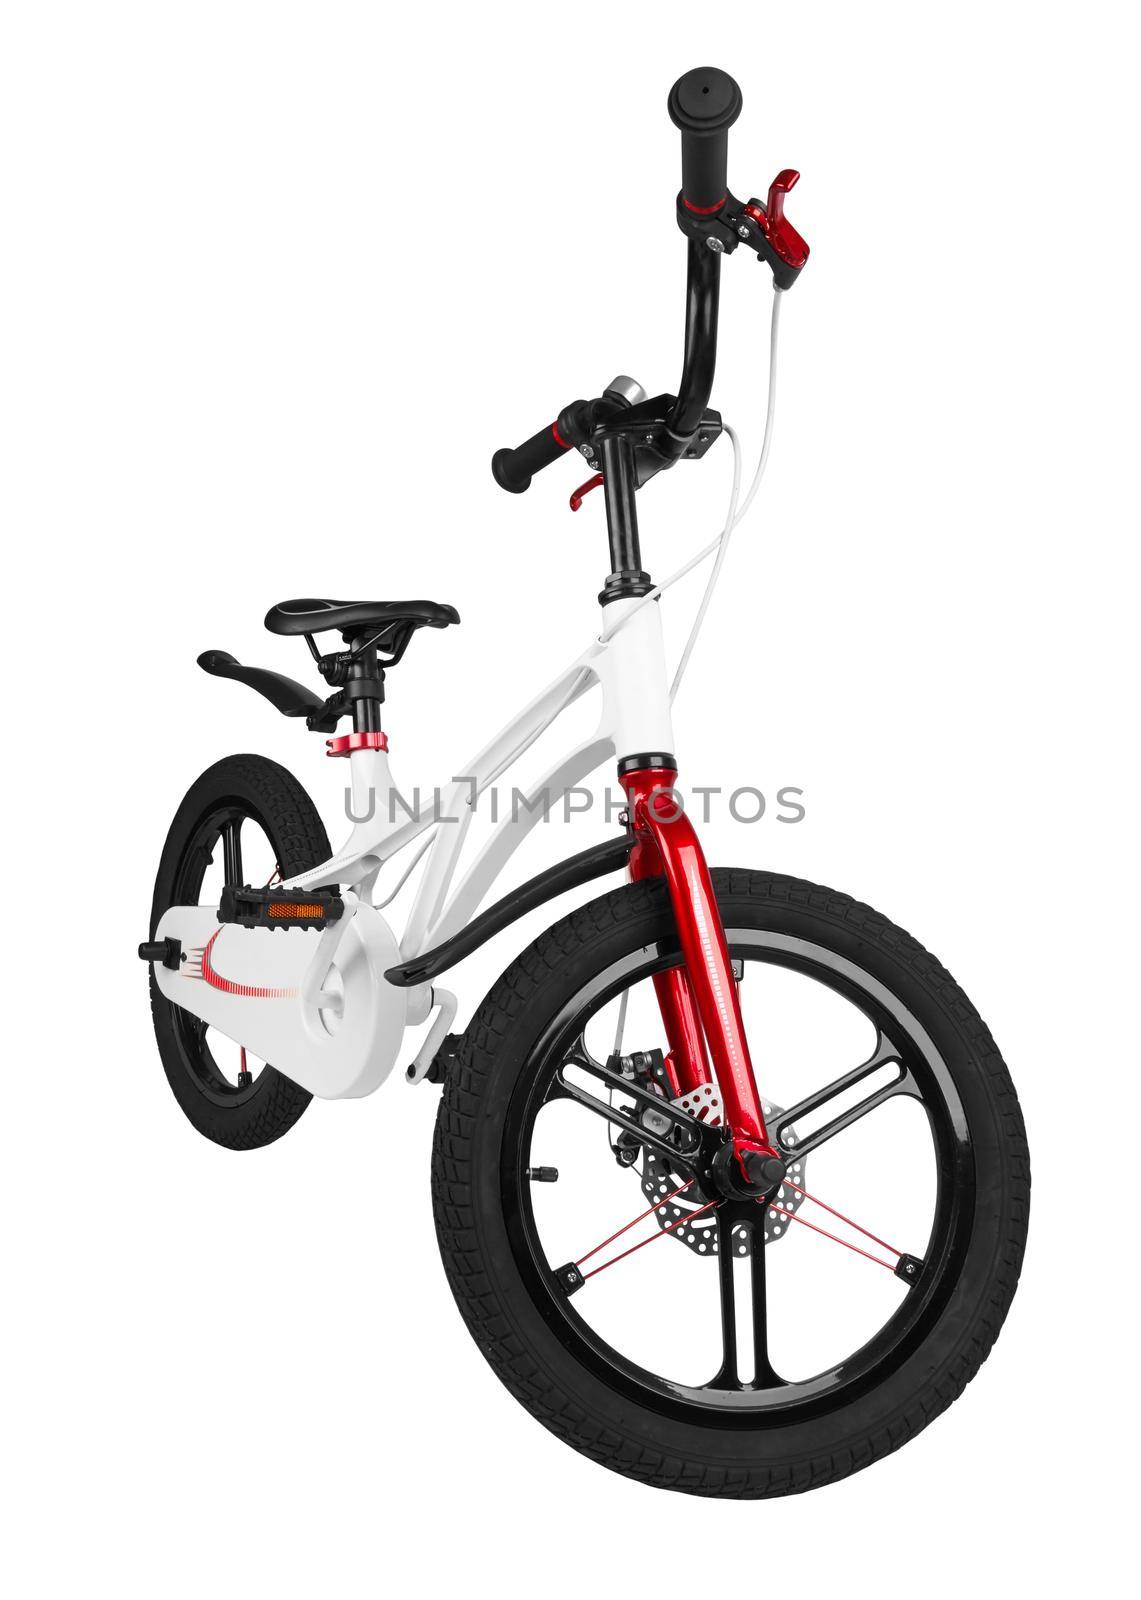 Kids bike isolated on a white background